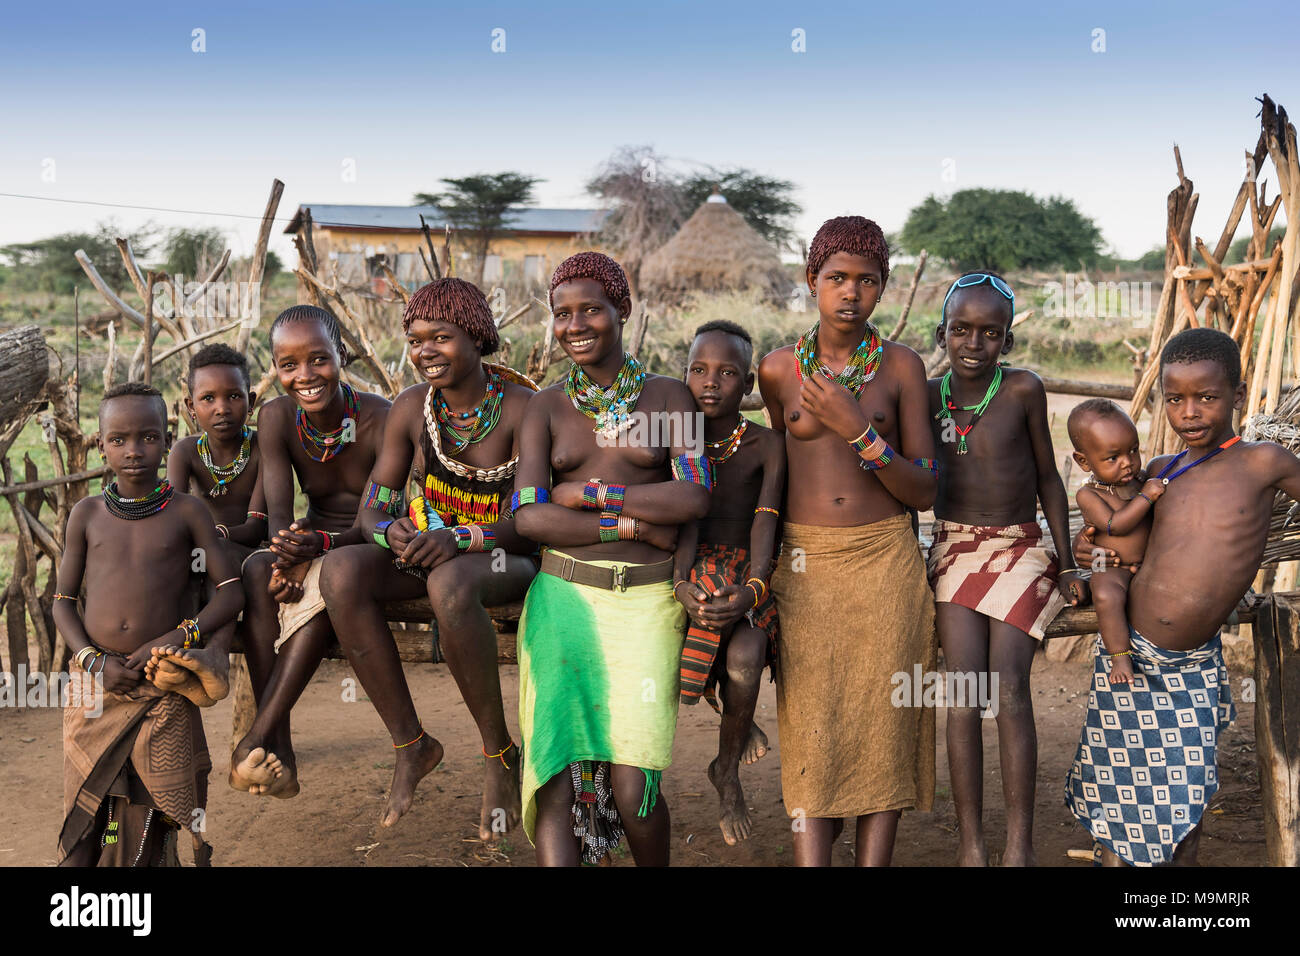 Group of girls and boys from the Hamer tribe, Turmi, region of southern nations, Ethiopia Stock Photo